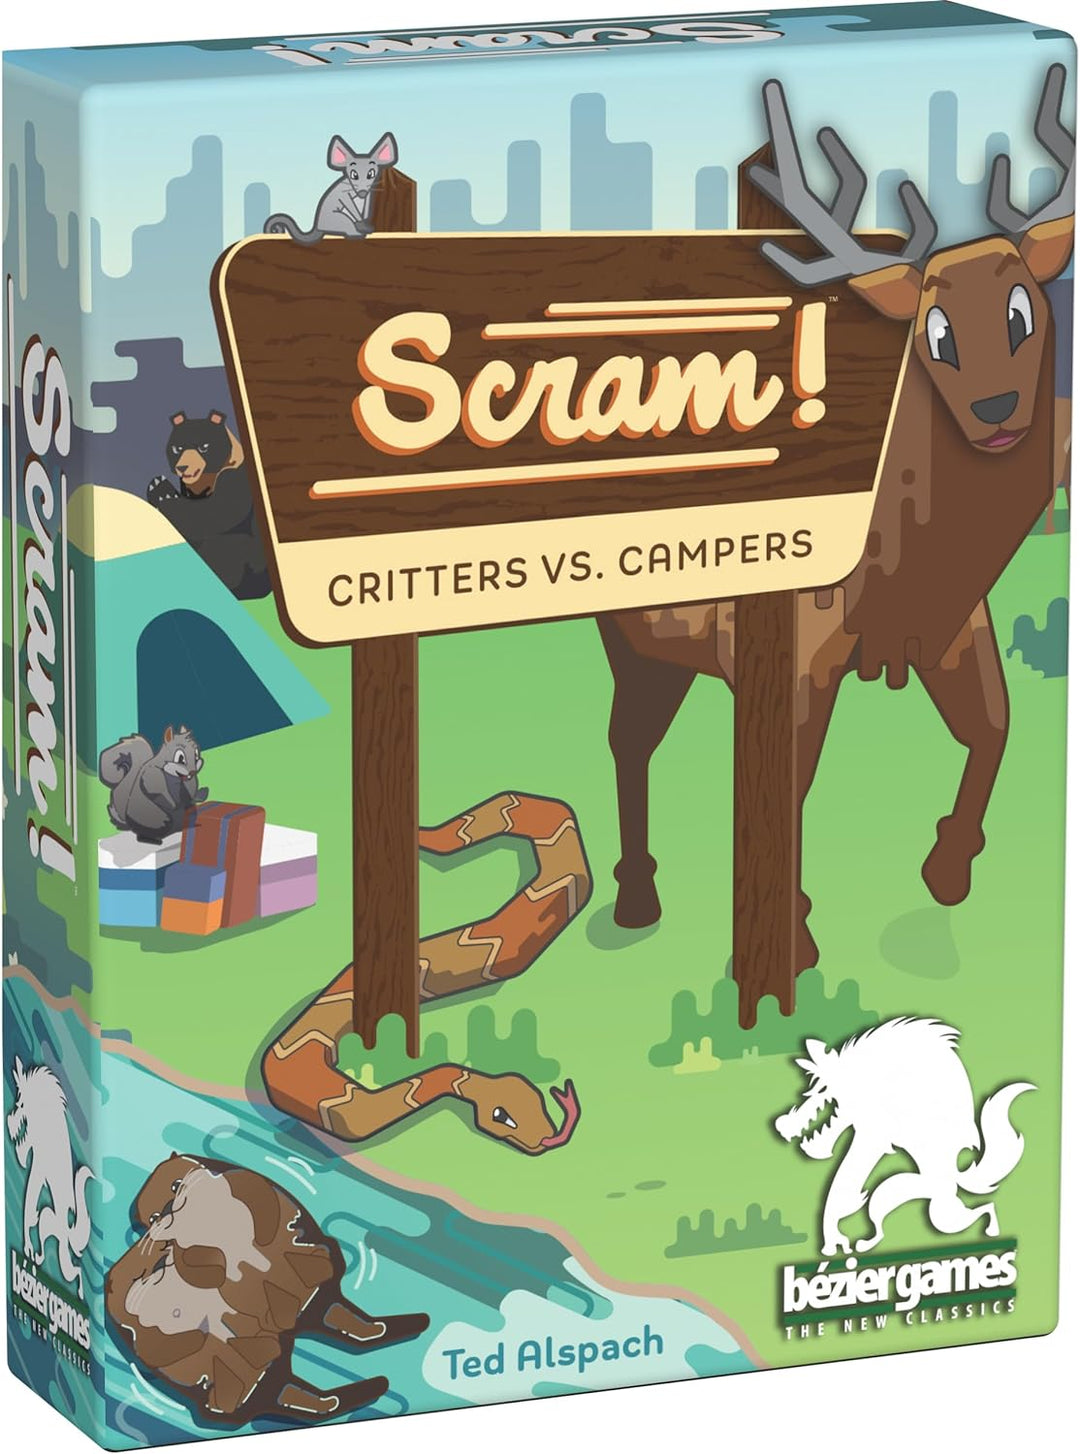 Scram! - A Terrific Card Game for Fast-Paced Fun! Great Card Game for Kids